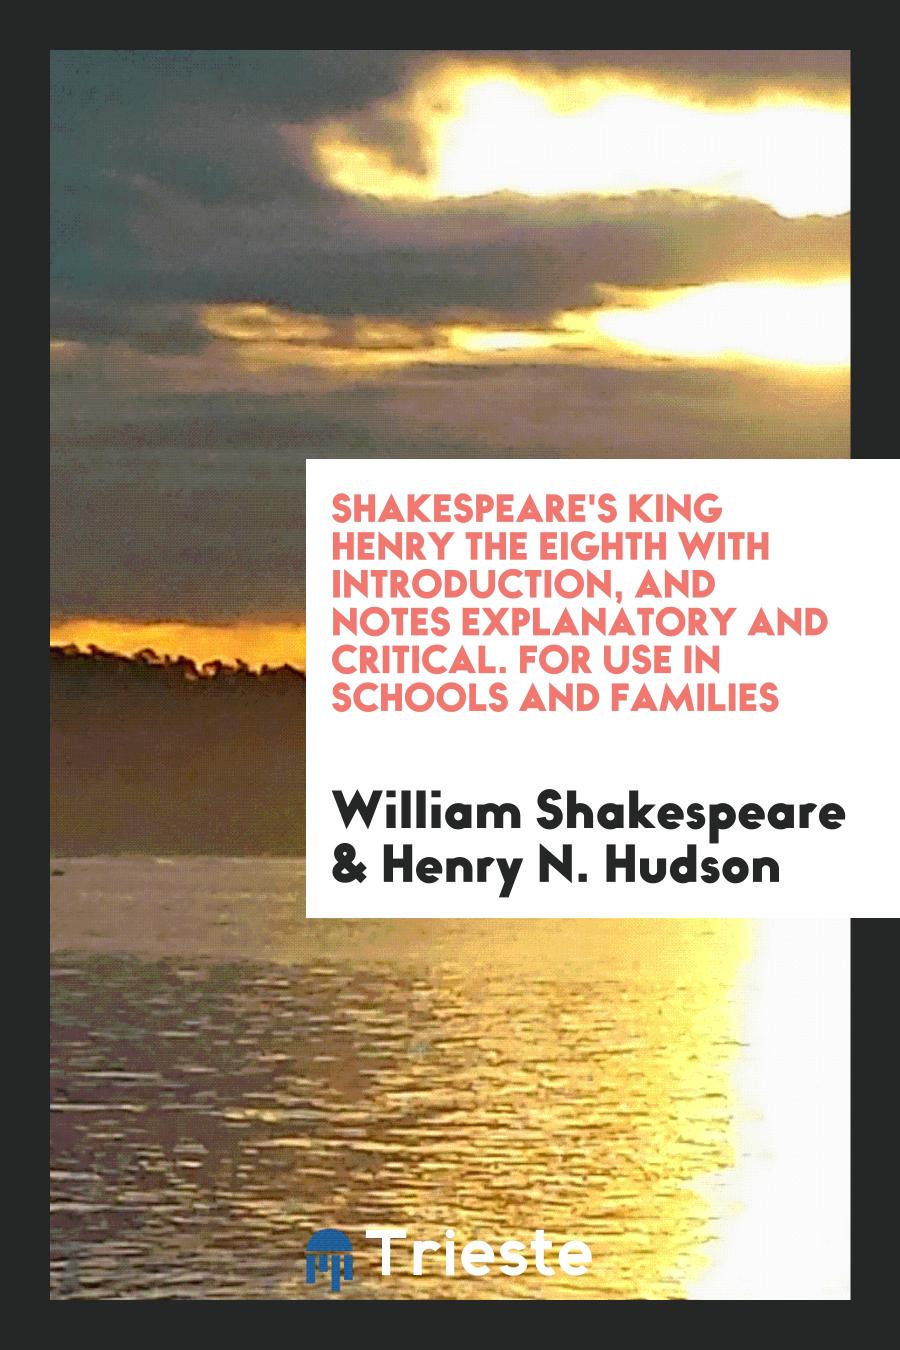 Shakespeare's King Henry the Eighth with Introduction, and Notes Explanatory and Critical. For Use in Schools and Families